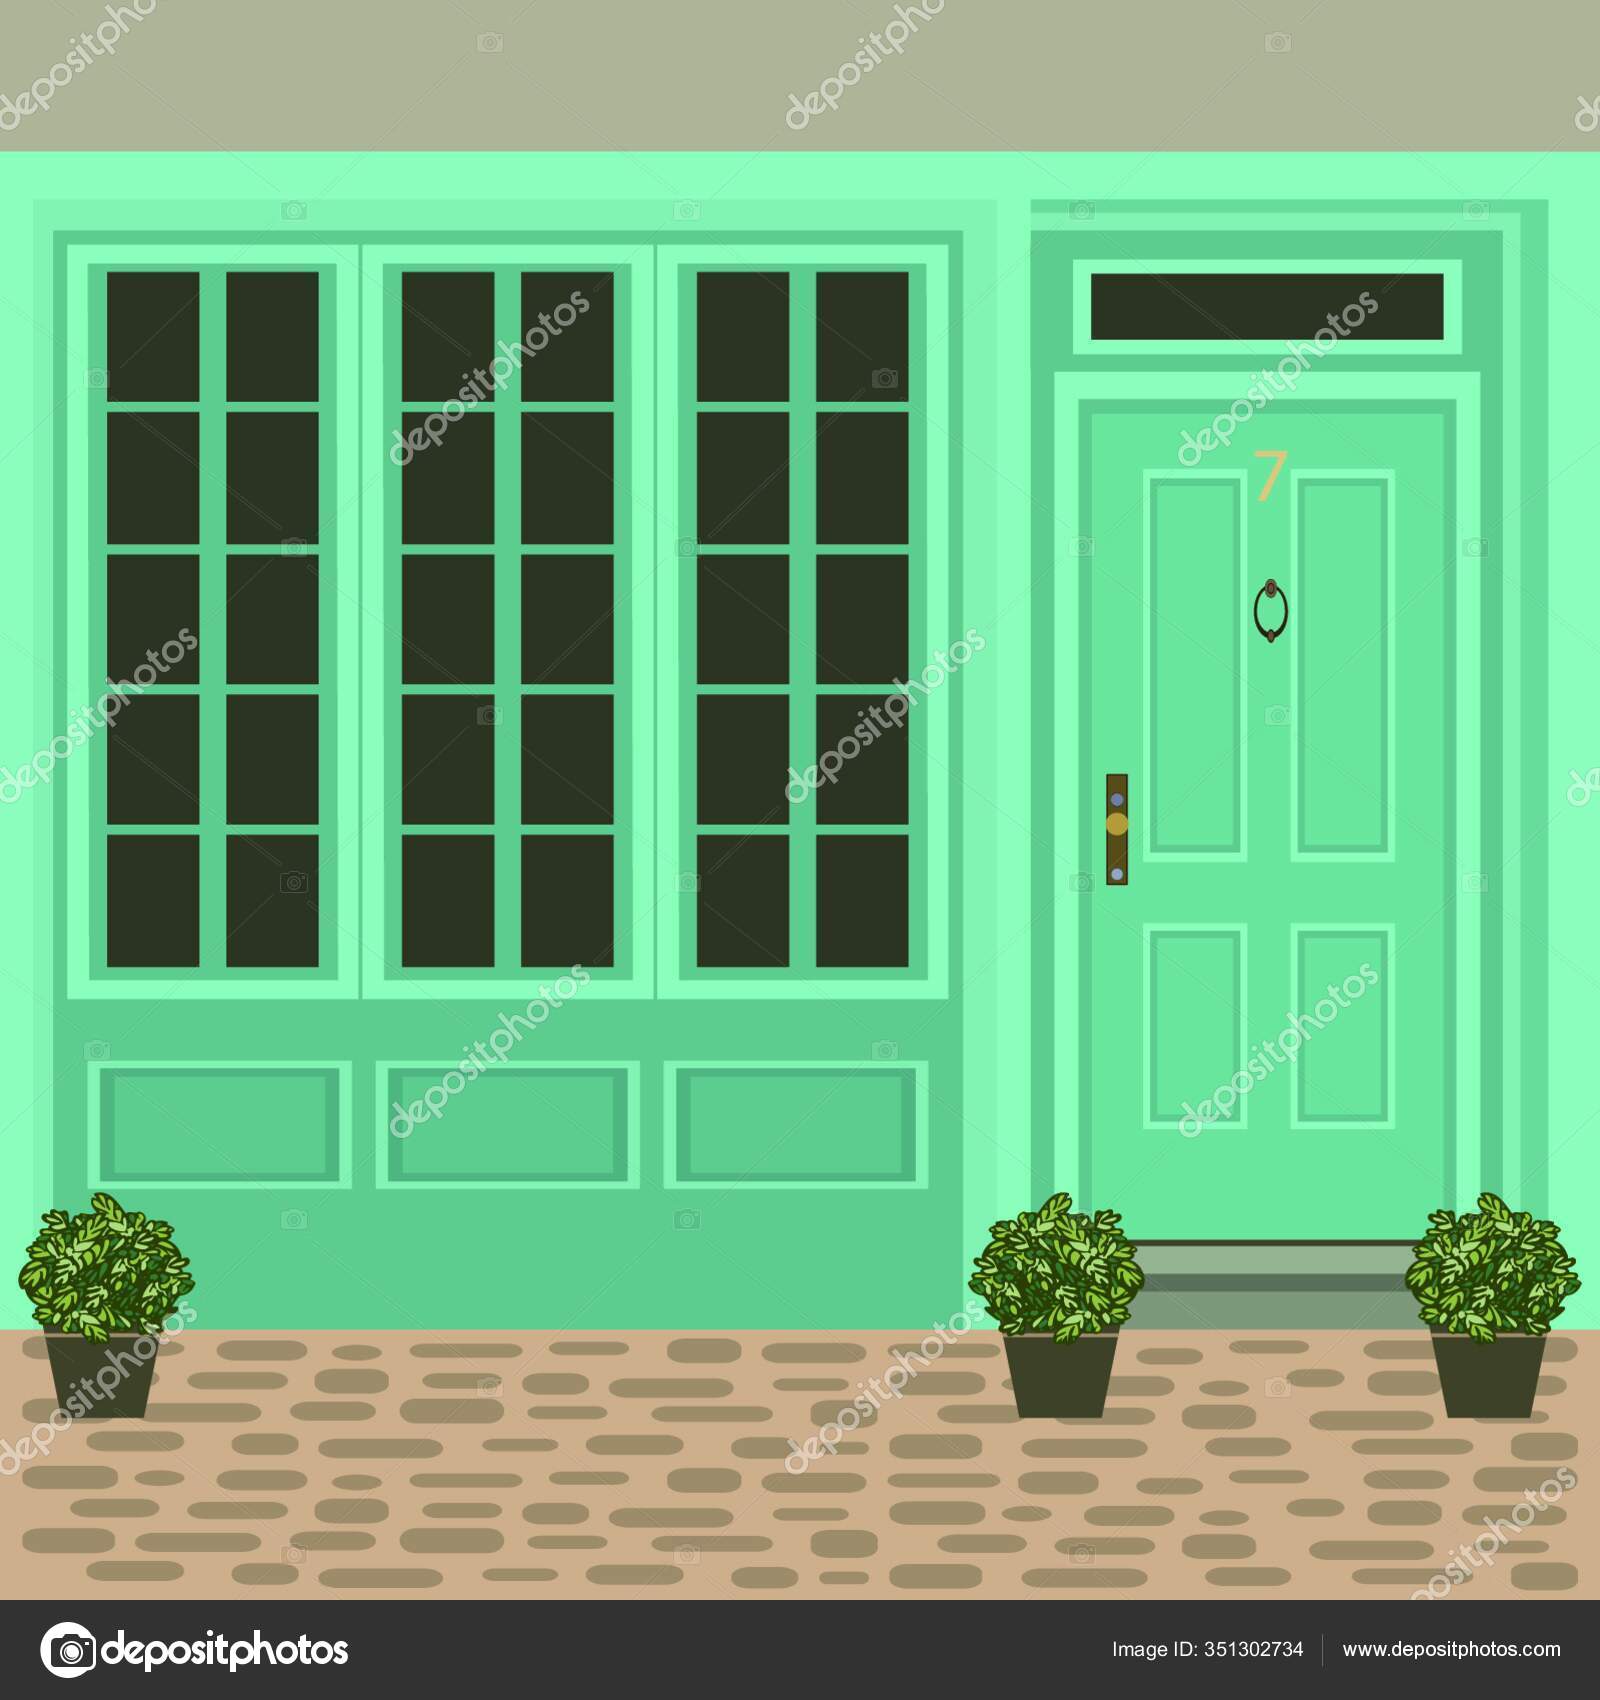 House door front with doorstep and steps porch, window, lamp, flowers in  pot, building entry facade, exterior entrance design illustration vector  flat style Stock Vector